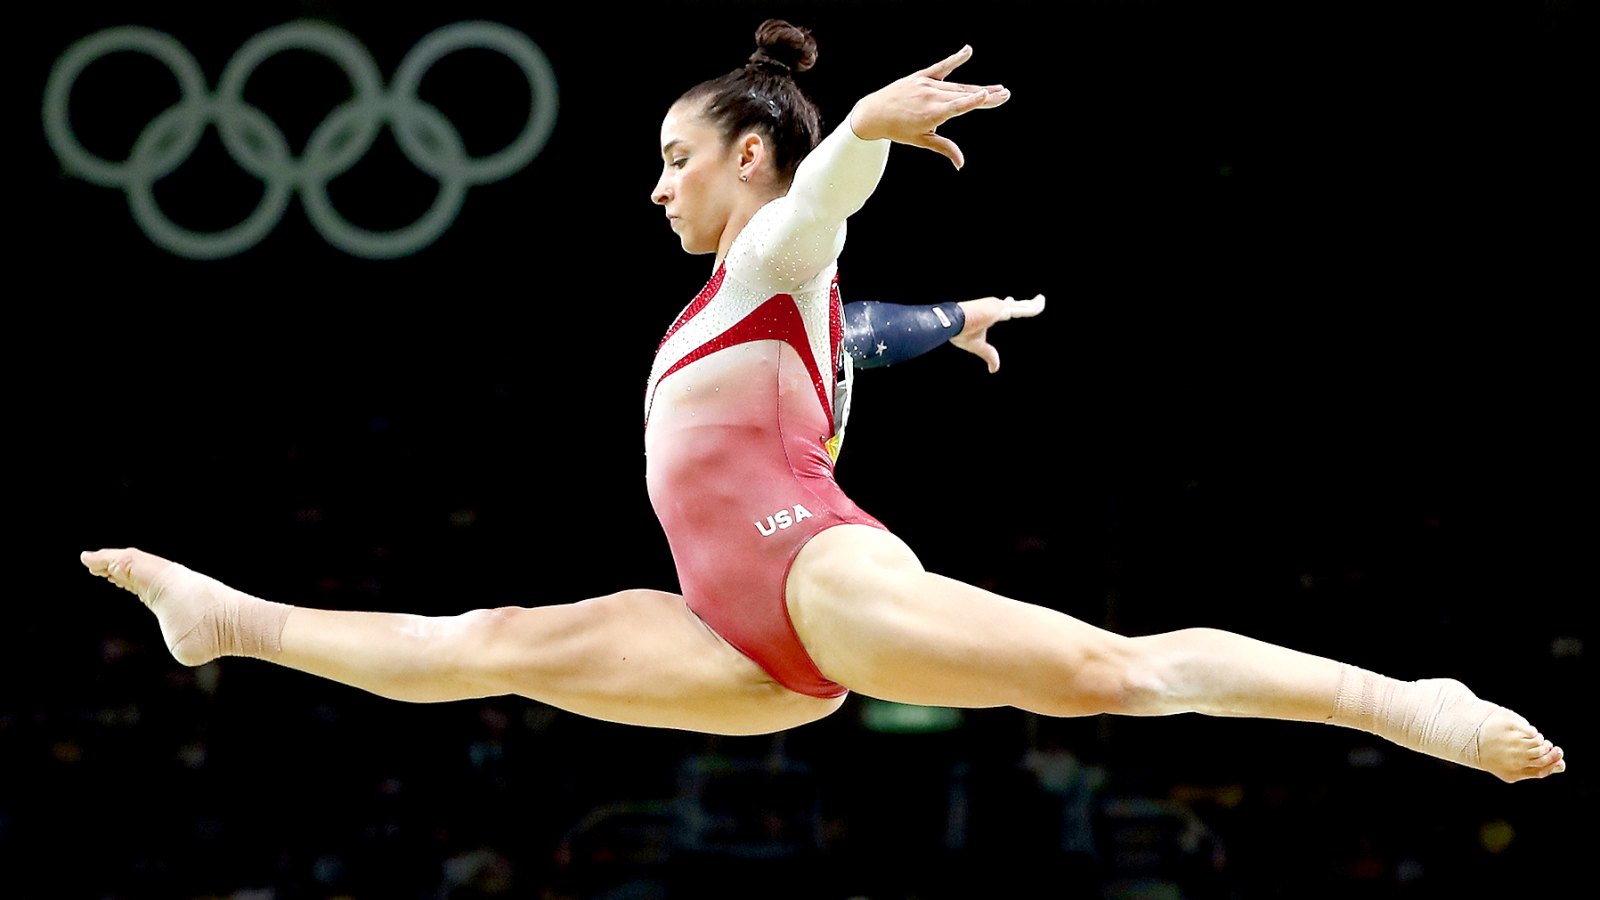 Alexandra Raisman of the United States competes on the balance beam during the Artistic Gymnastics Women's Team Final on Day 4 of the Rio 2016 Olympic Games at the Rio Olympic Arena on August 9, 2016 in Rio de Janeiro, Brazil.